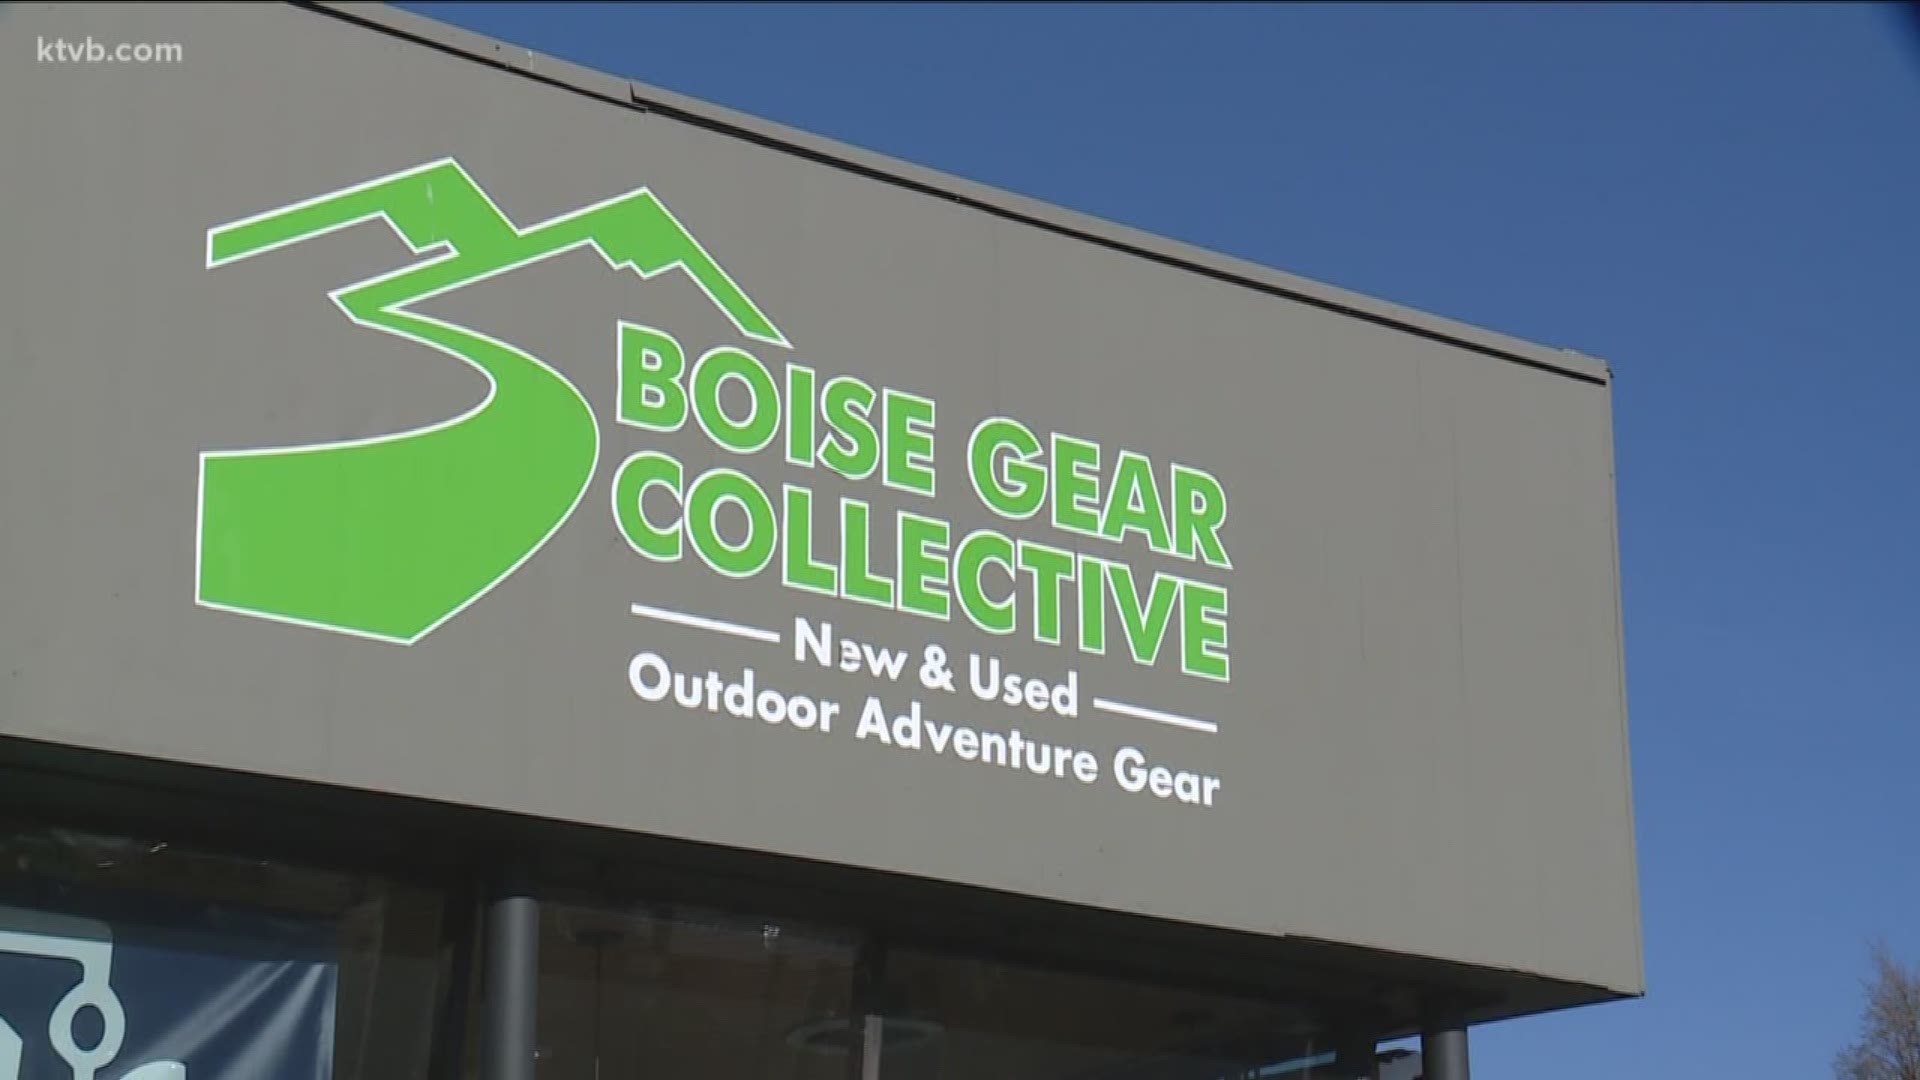 Boise Gear Collective, formerly known as Backcountry Pursuit, had to re-brand after a Utah-based company claimed a trademark violation over the word "backcountry."